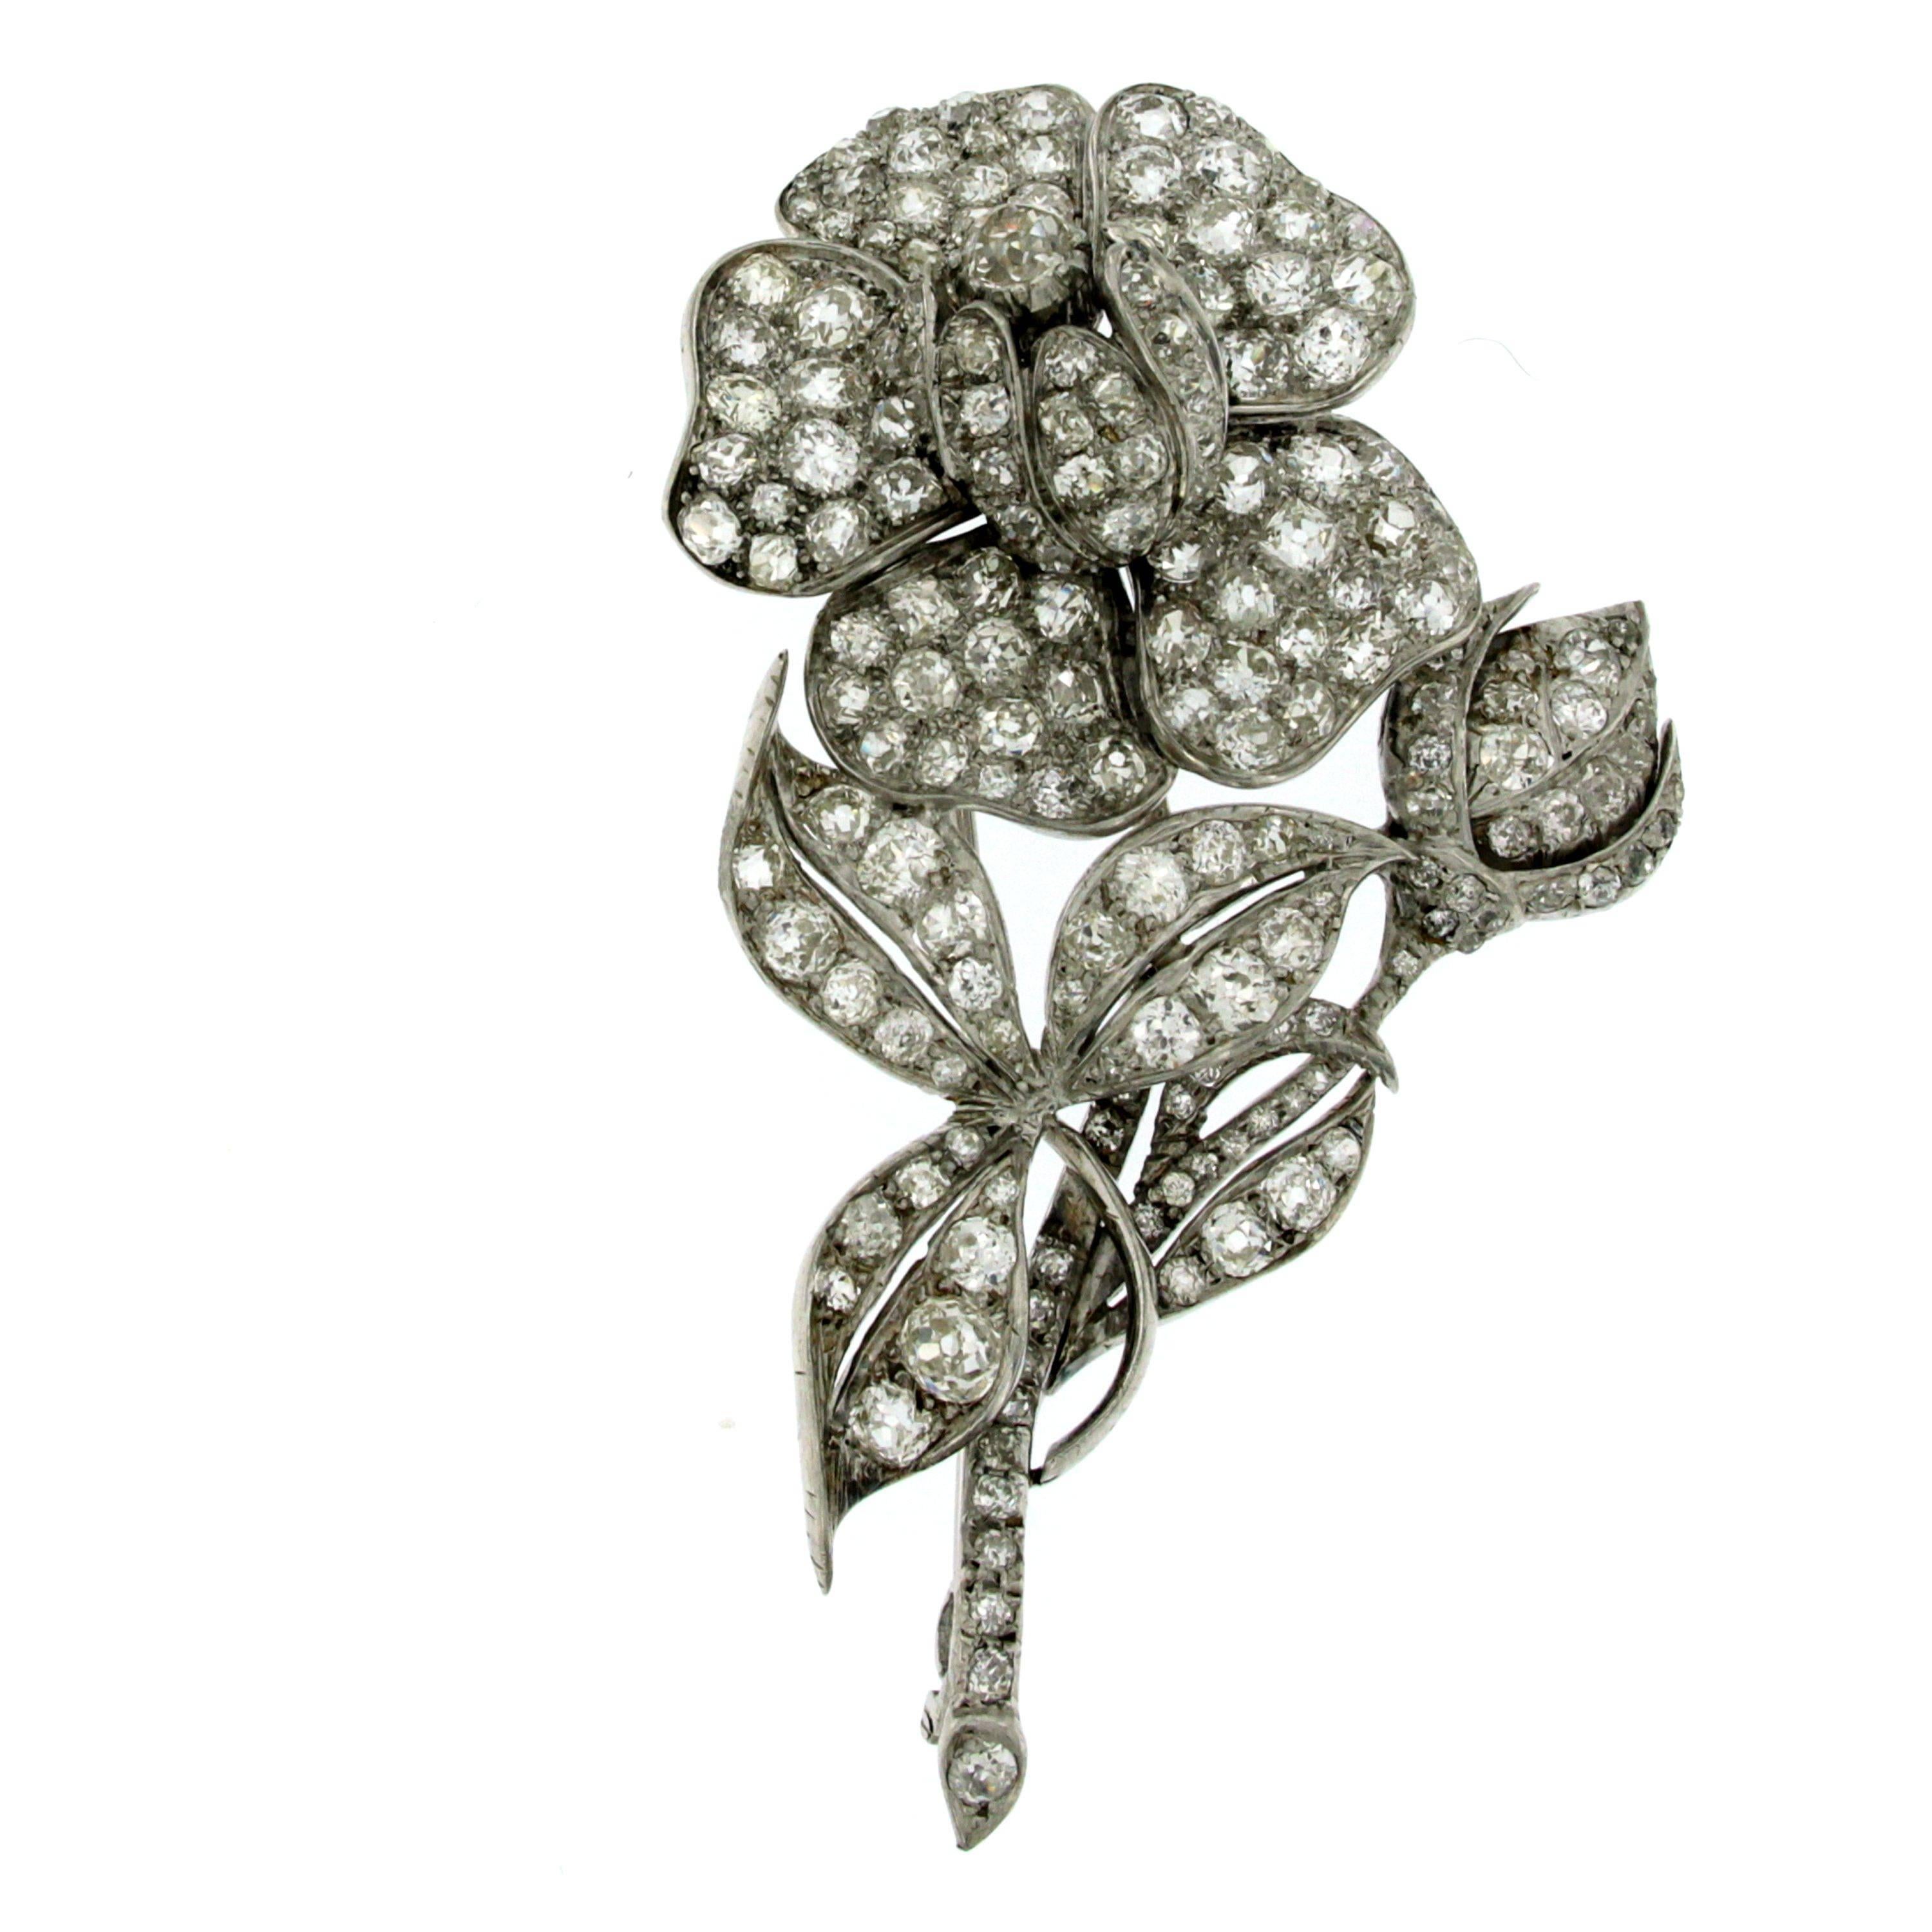 Stunning hand crafted floral design Brooch, set with approx. 190 Old Mine Cut Diamonds, total weight 20 carat graded I color SI clarity, 18k white gold mounting; This piece is designed and crafted entirely by hand in the traditional way, using age